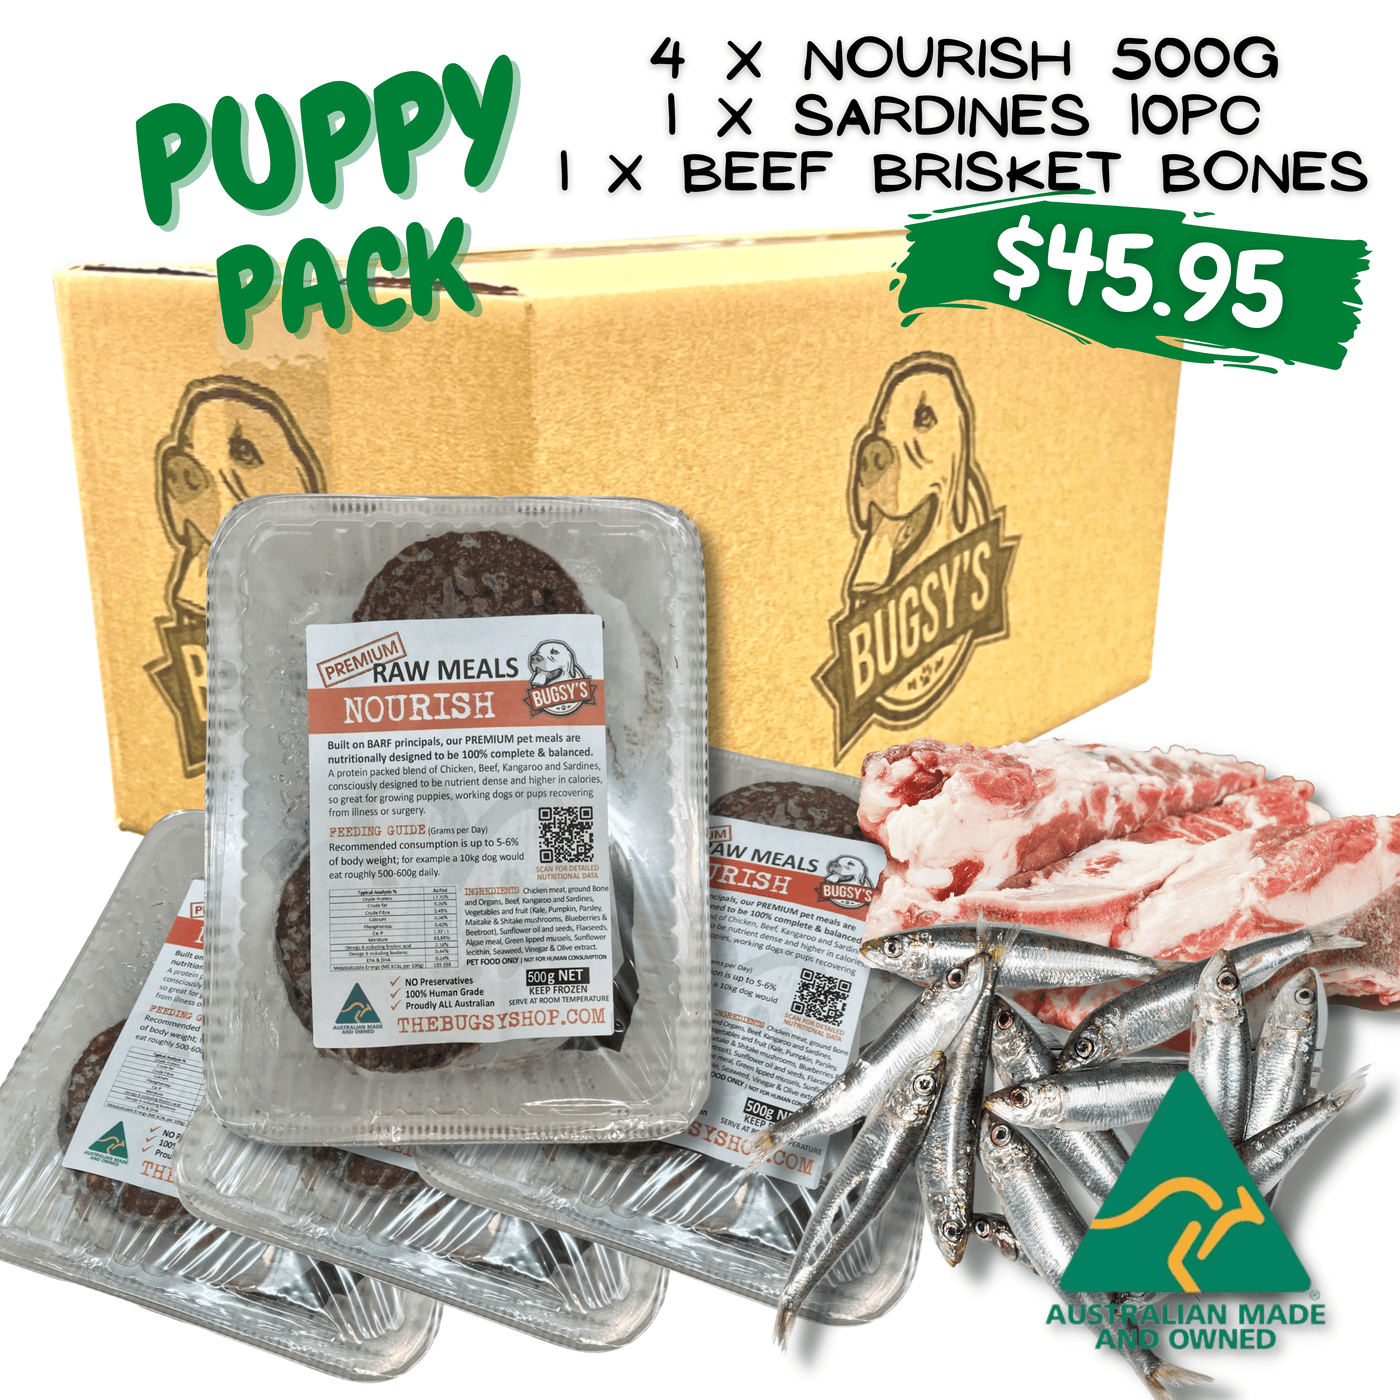 PREMIUM Raw | 'PUPPY' BARF Meal Pack for Dogs